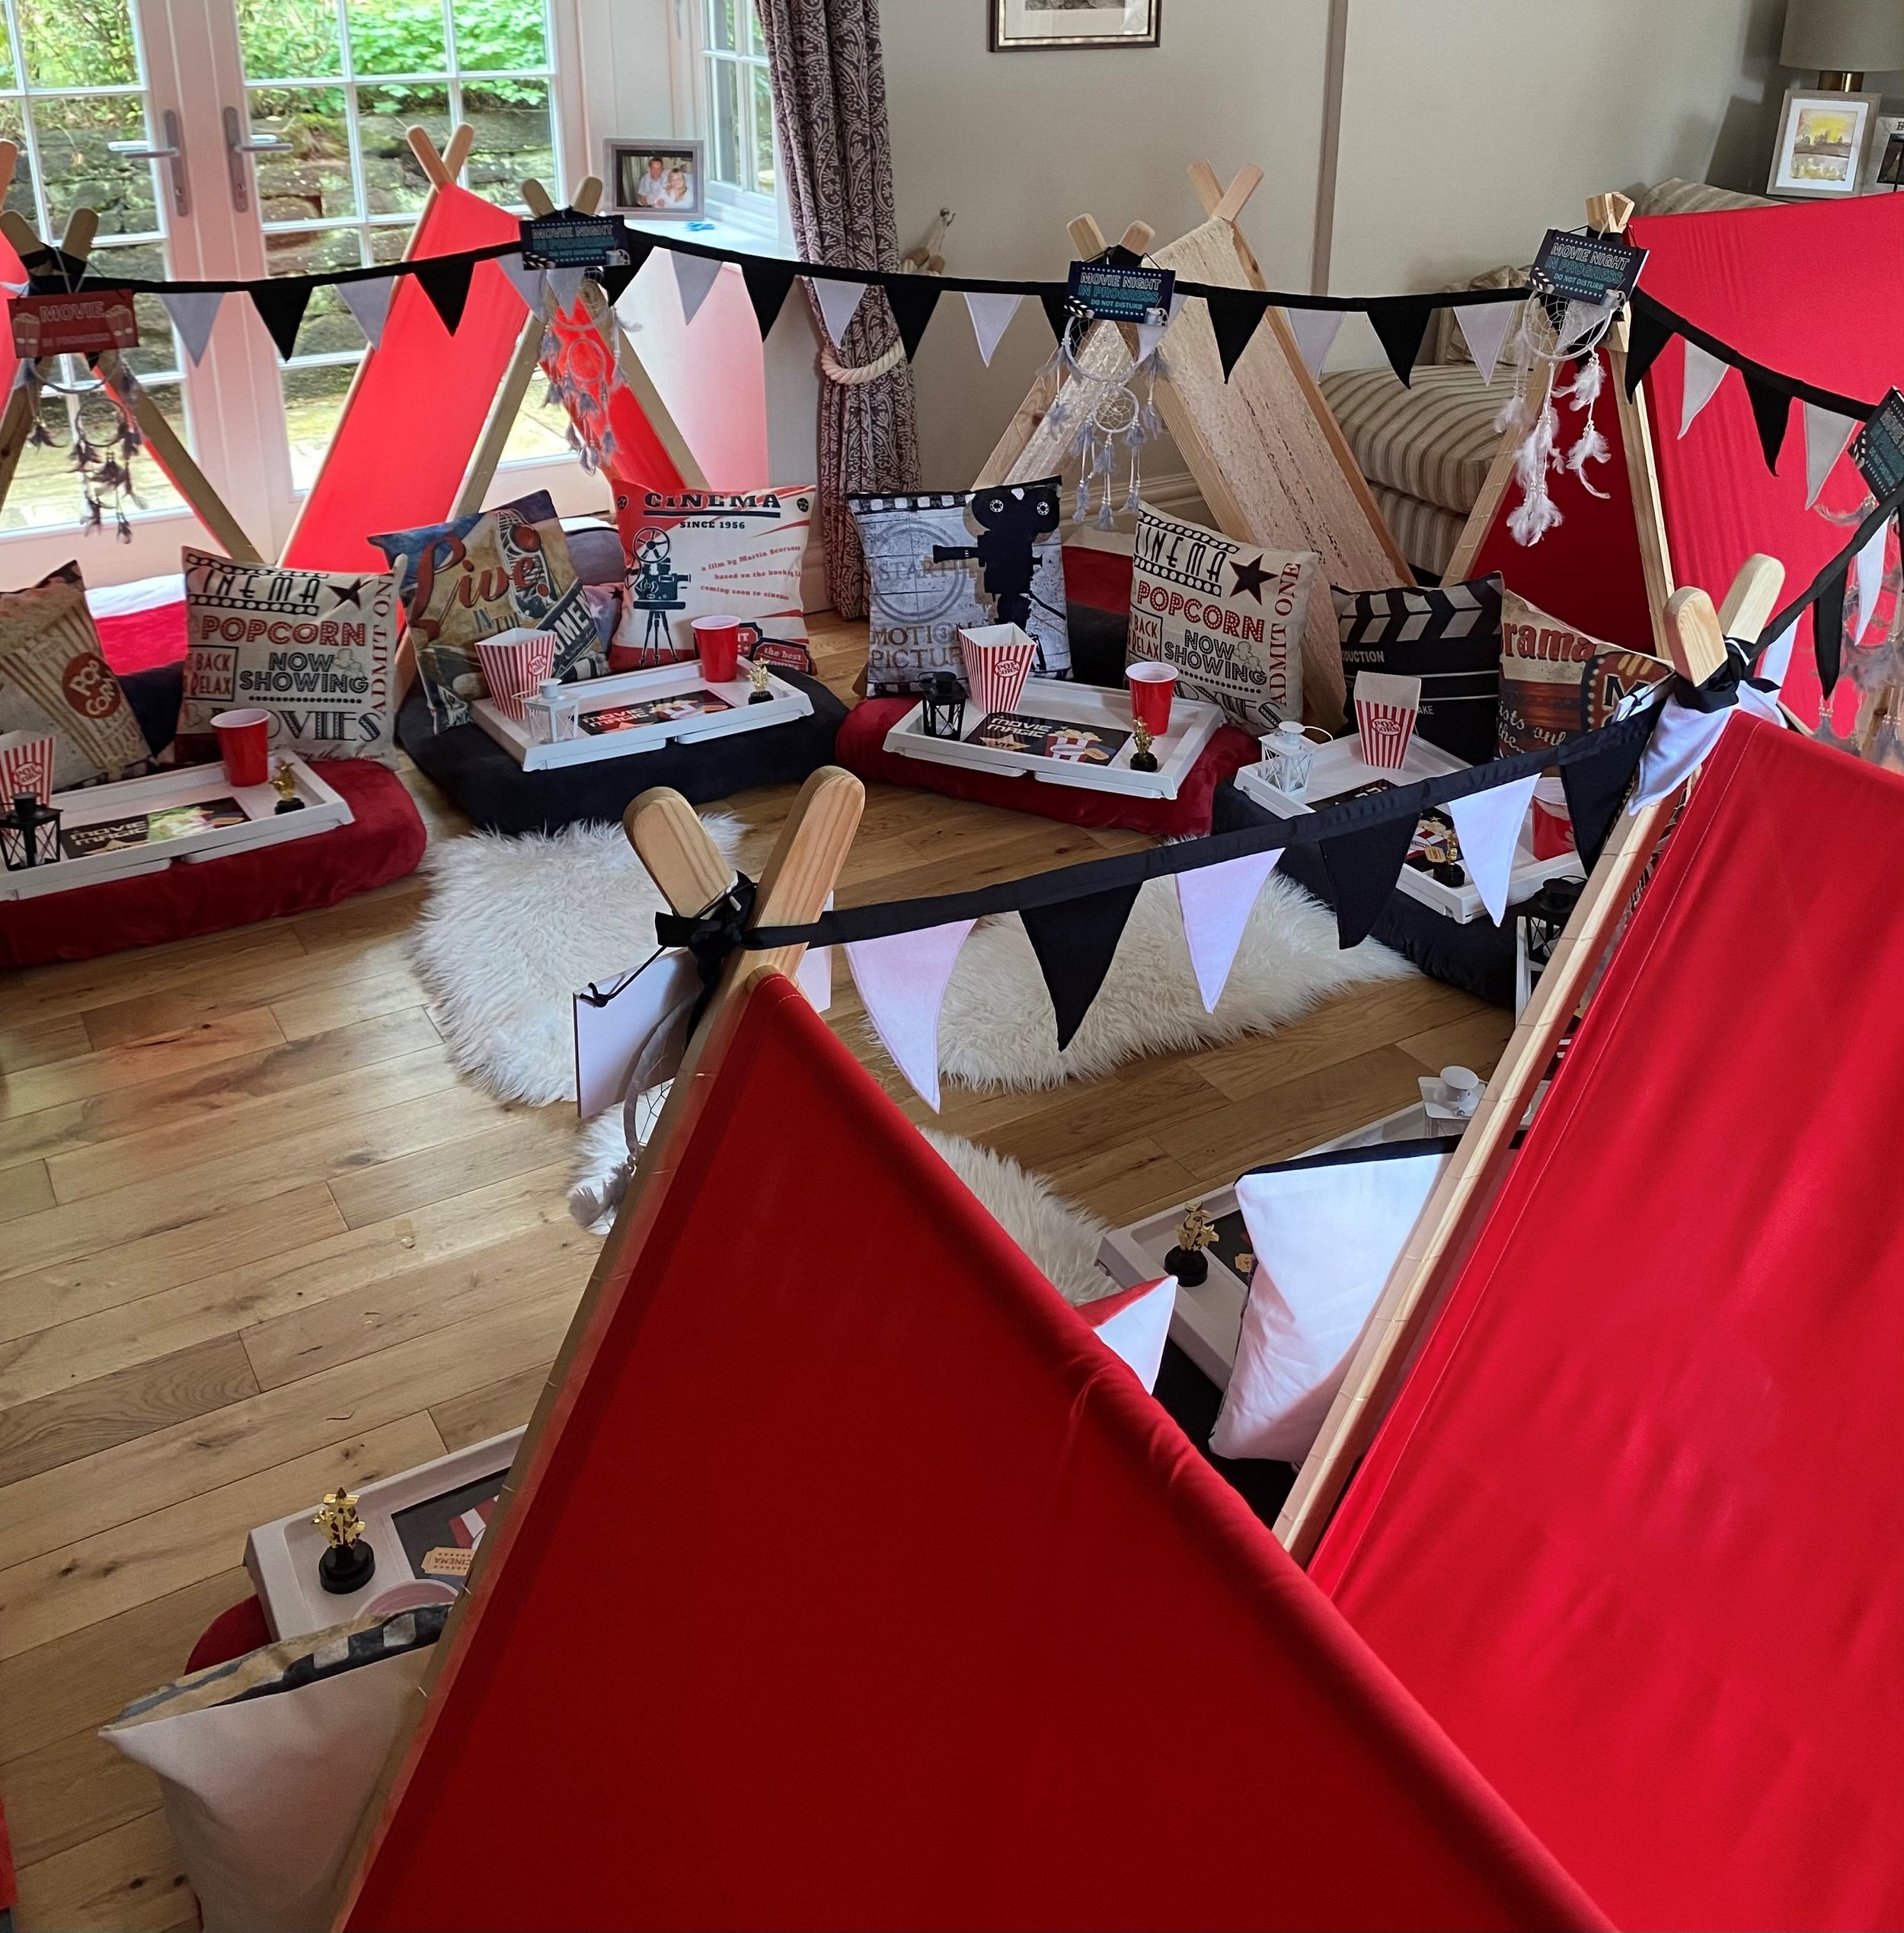 The Little Sleepy Teepee Party - Sleepover Party Tents in Cheshire